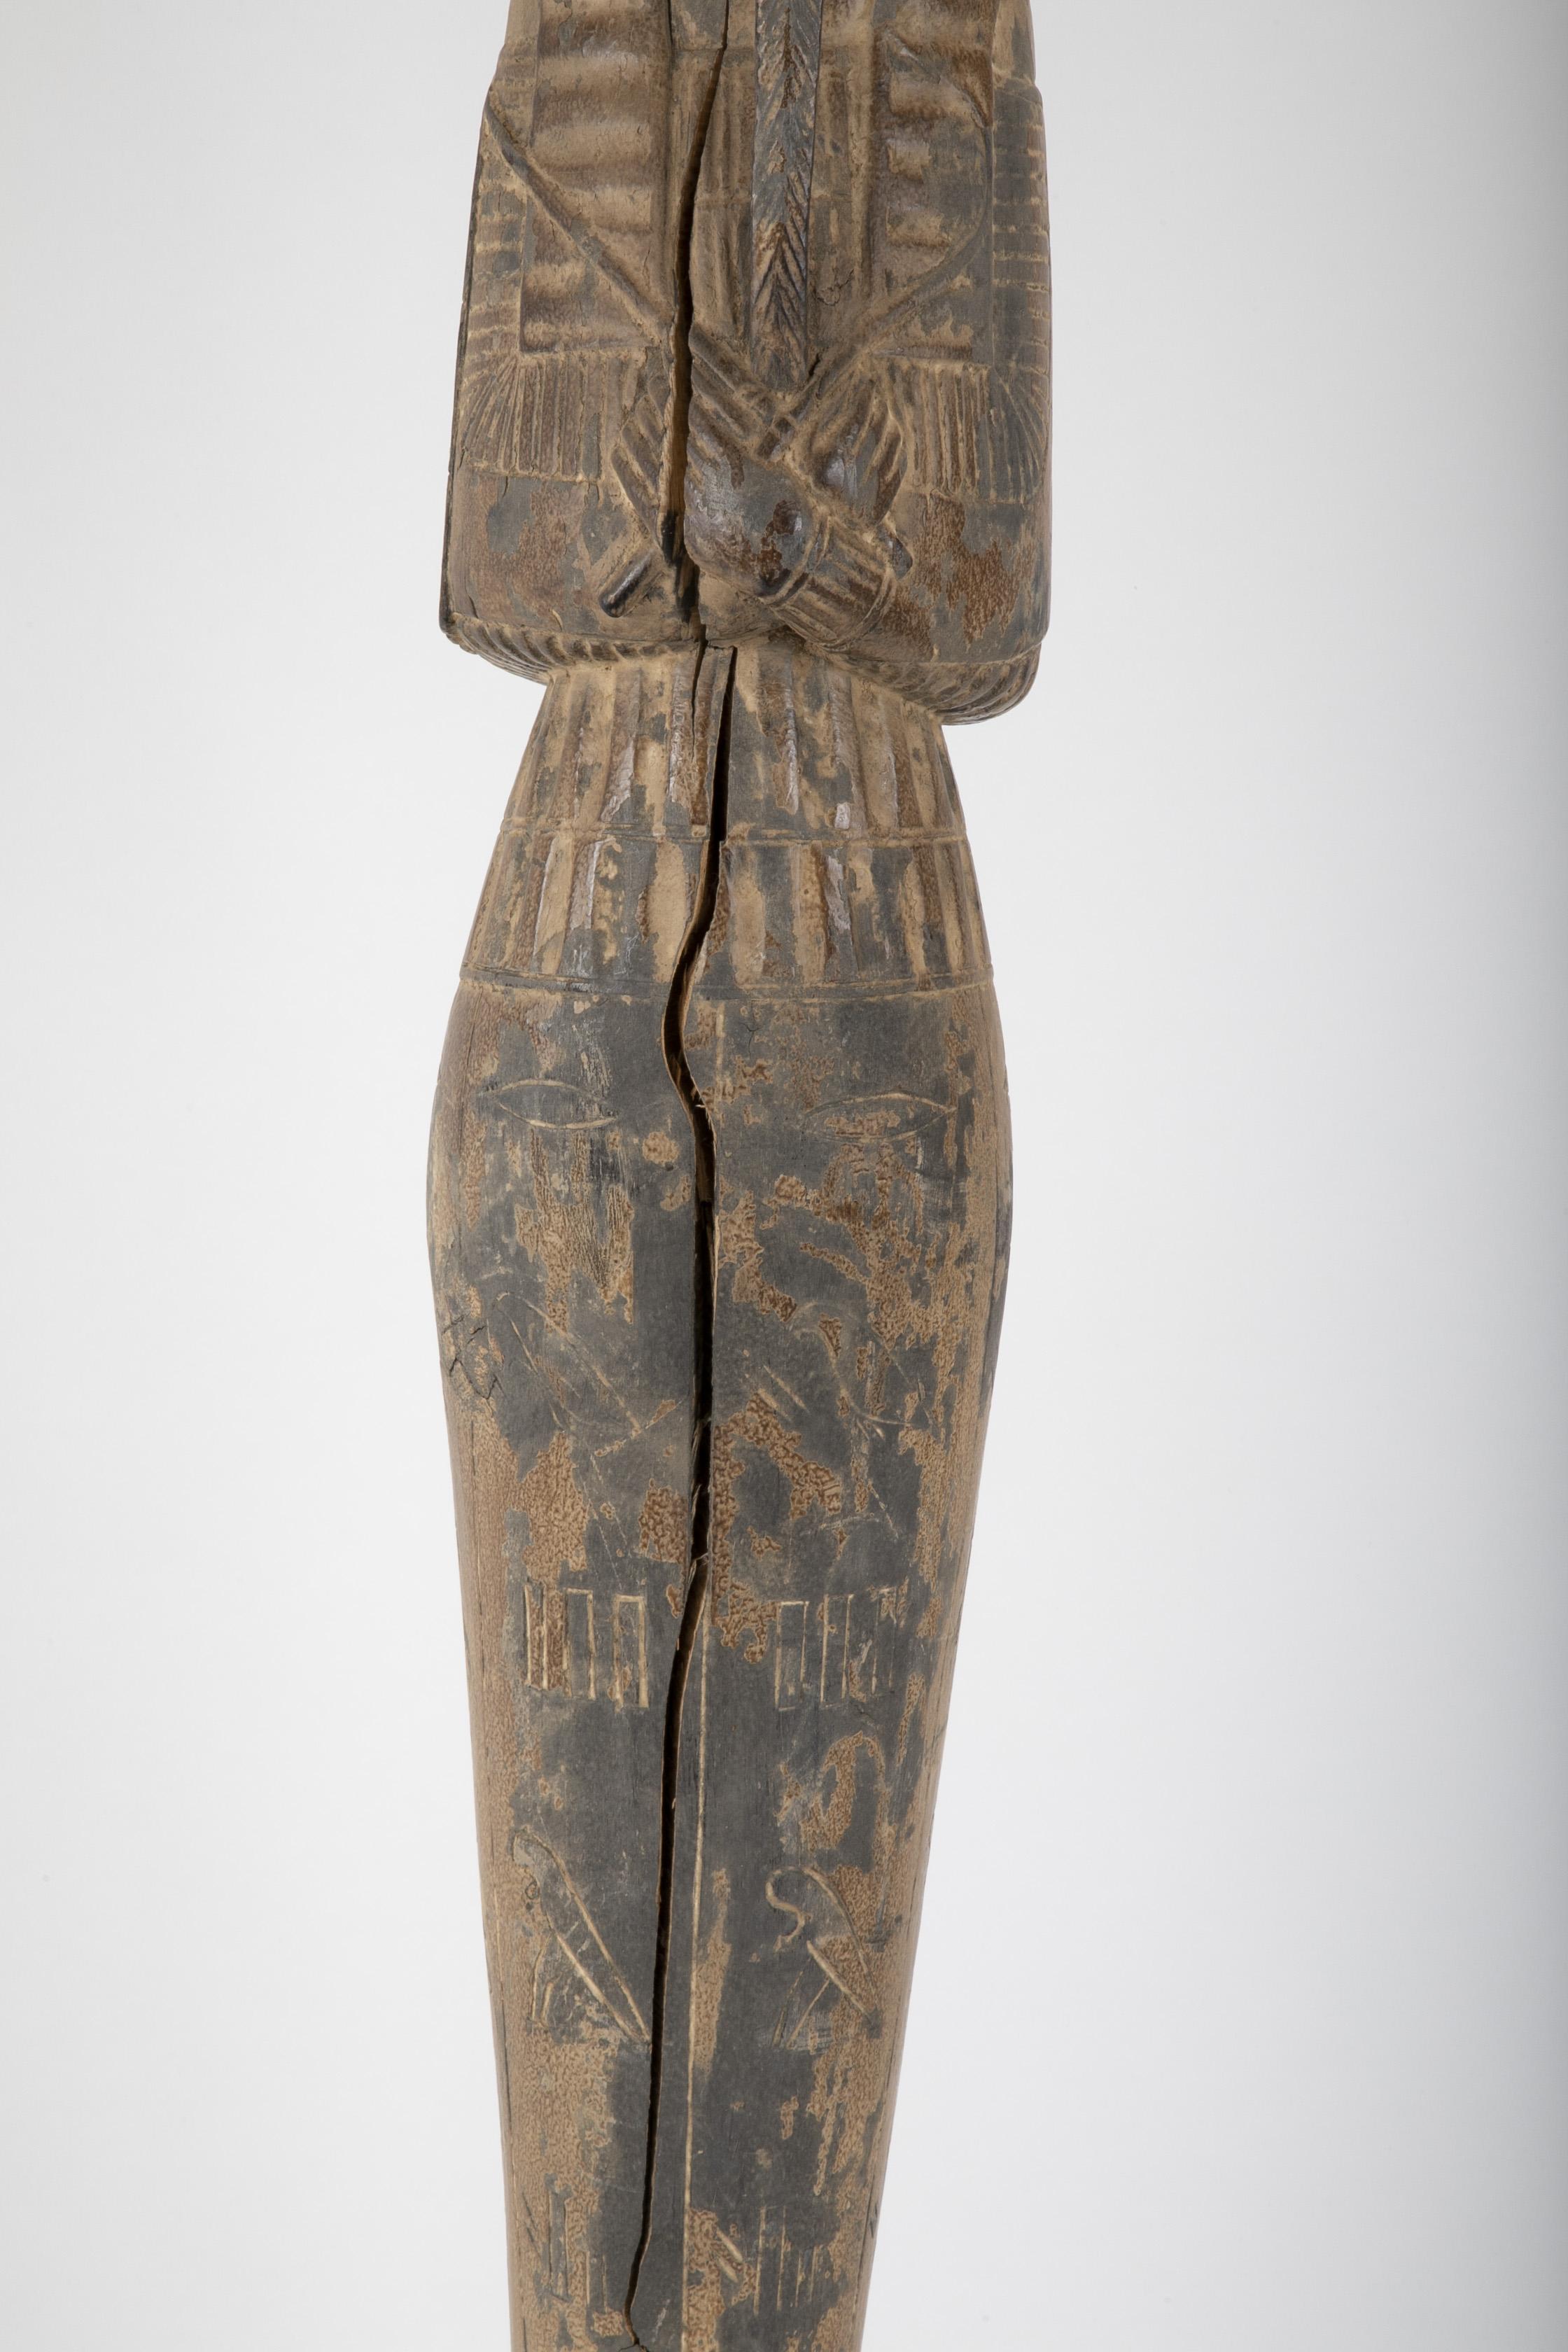 French Egyptian Revival Carved Wood Figure of King Tutankamun In Good Condition For Sale In Stamford, CT